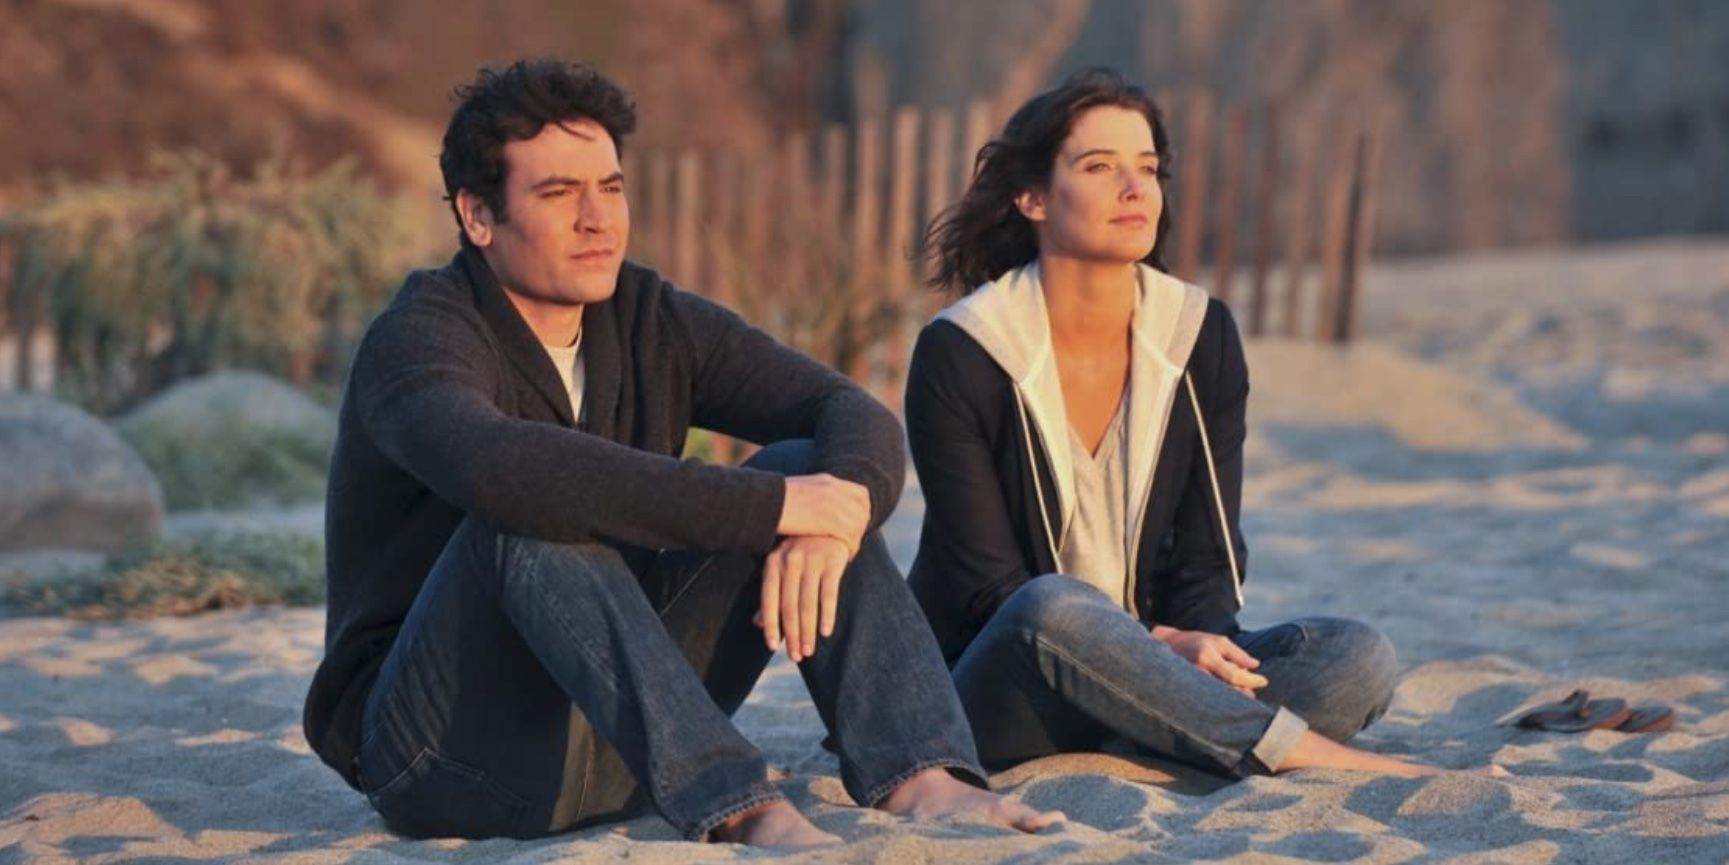 Josh Radnor and Cobie Smulders in 'How I Met Your Mother'